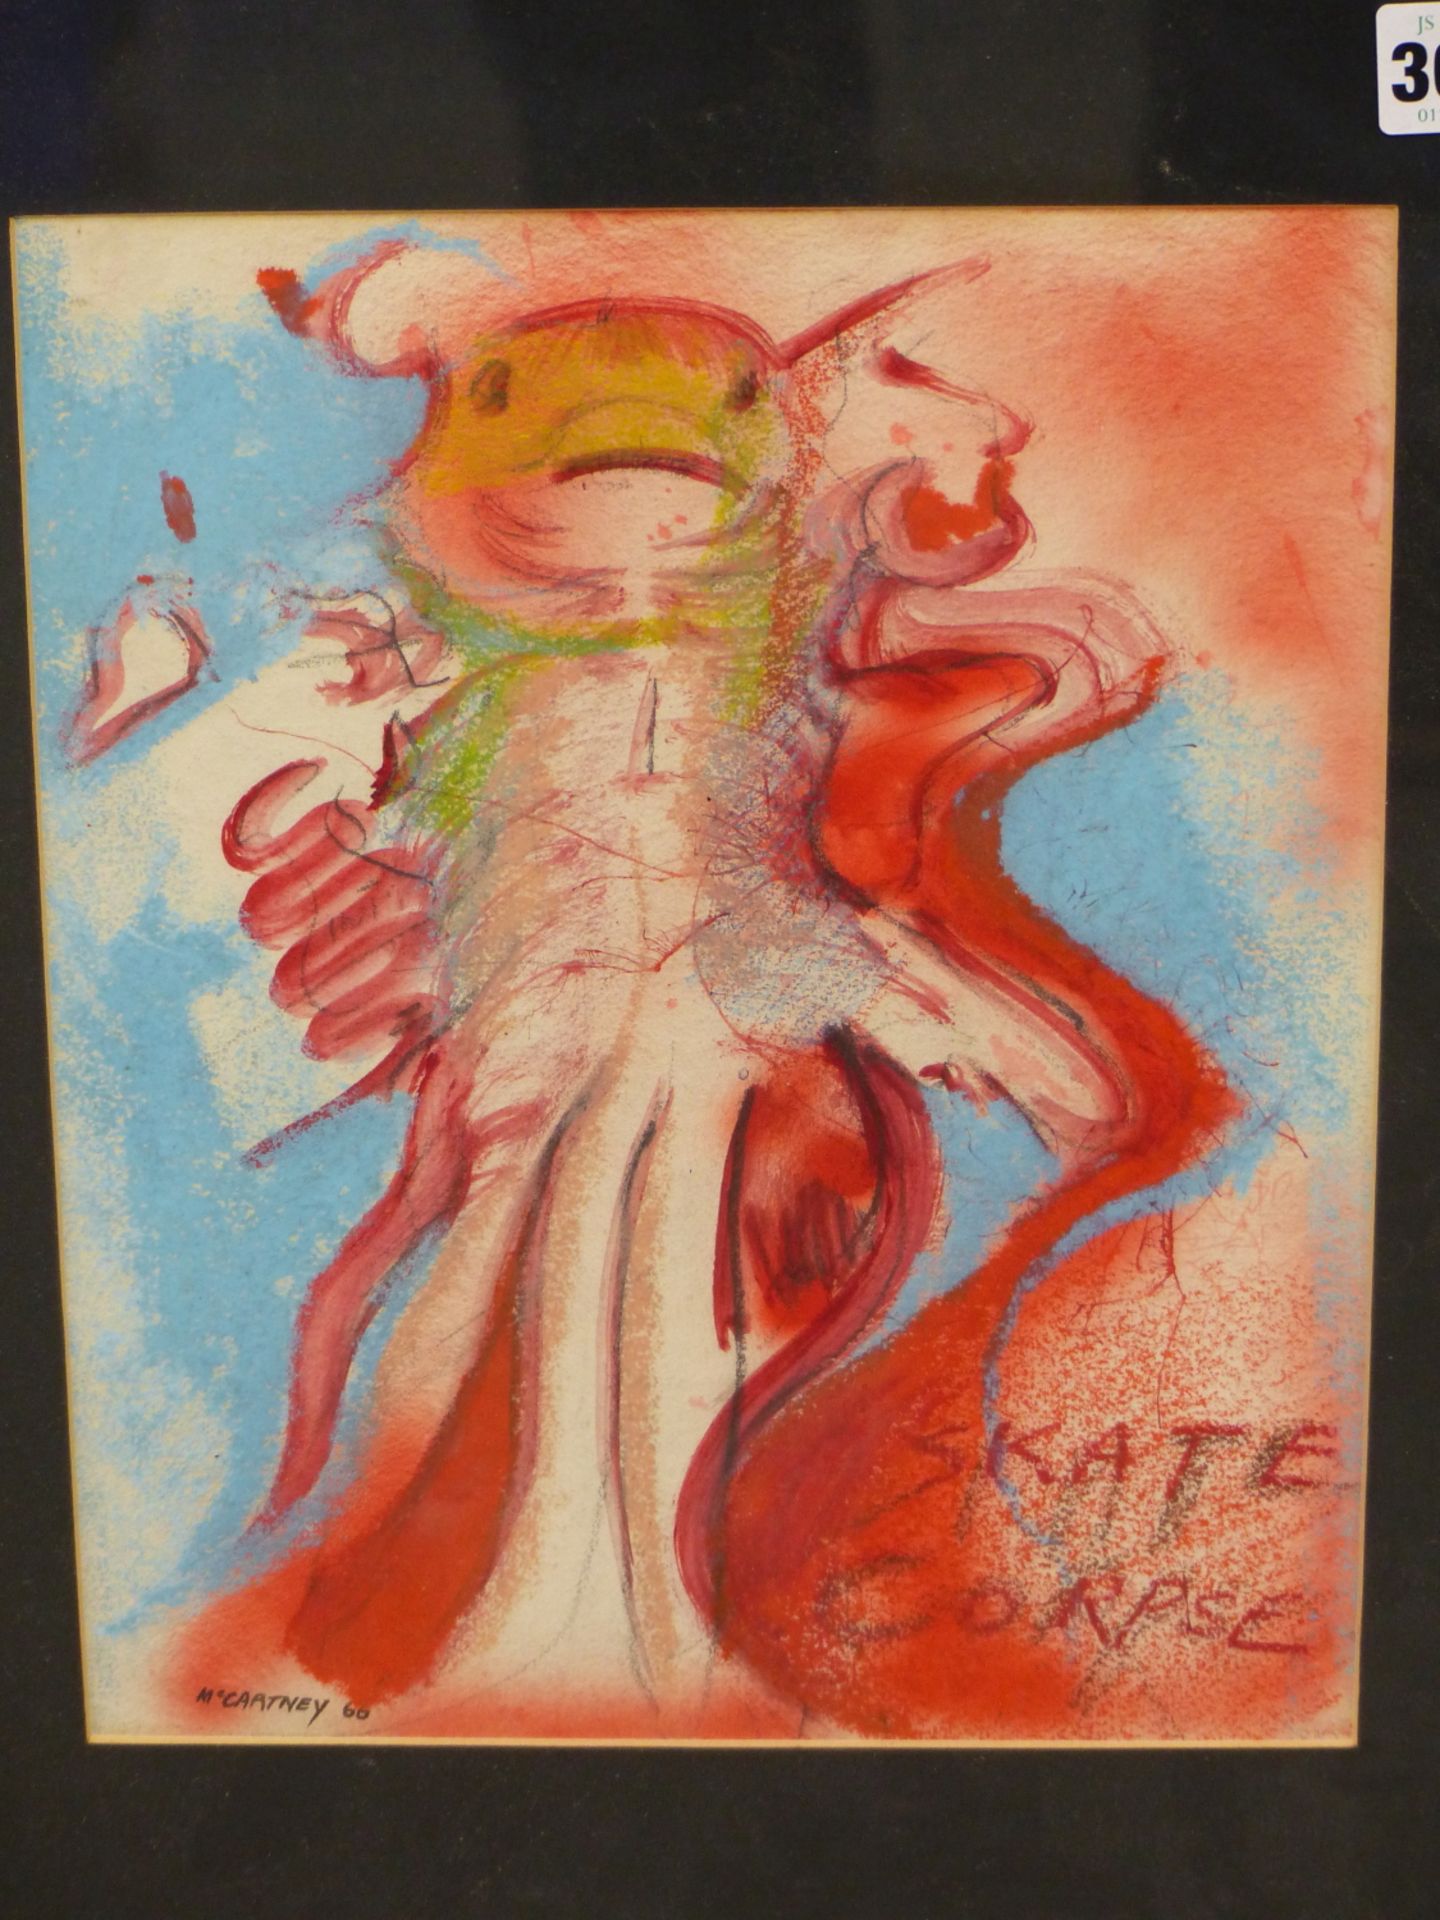 McCARTNEY ( 20TH CENTURY) ARR. SKATE CORPSE. COLOUR WASH AND PASTEL ON PAPER, SIGNED AND DATED '60 L - Image 2 of 6